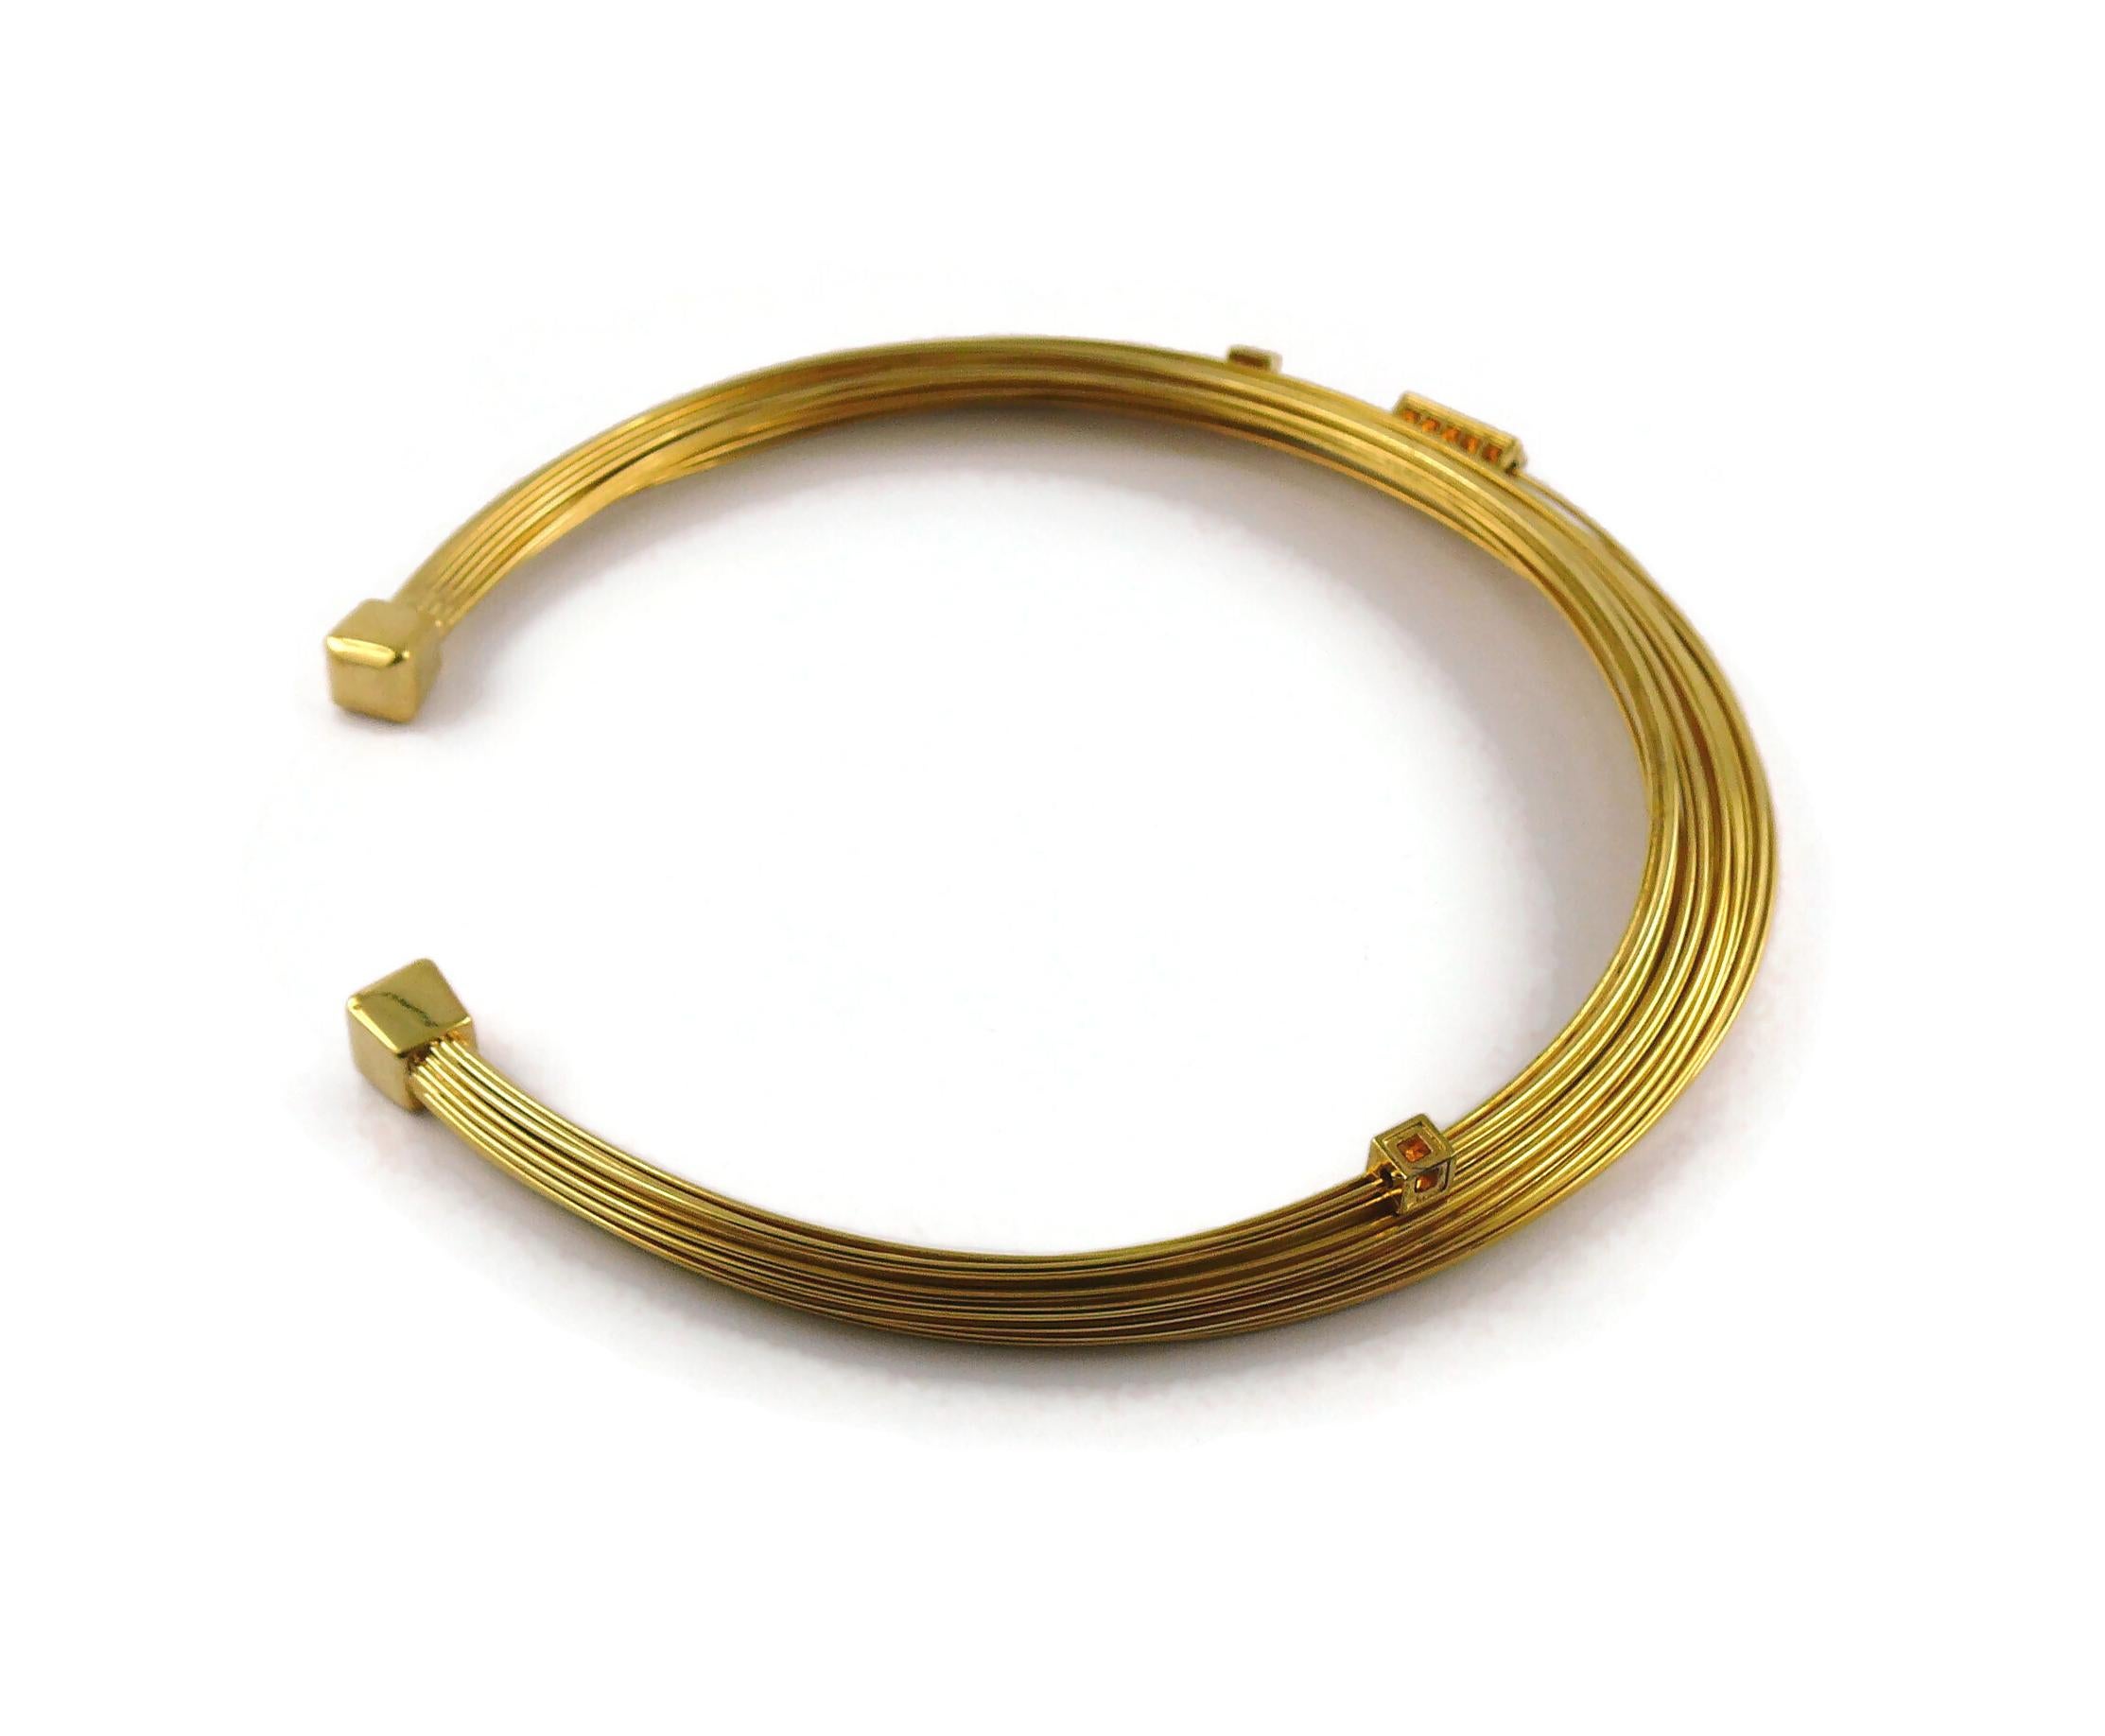 Thierry Mugler Gold Toned Bundled Wires Choker Necklace In Fair Condition For Sale In Nice, FR